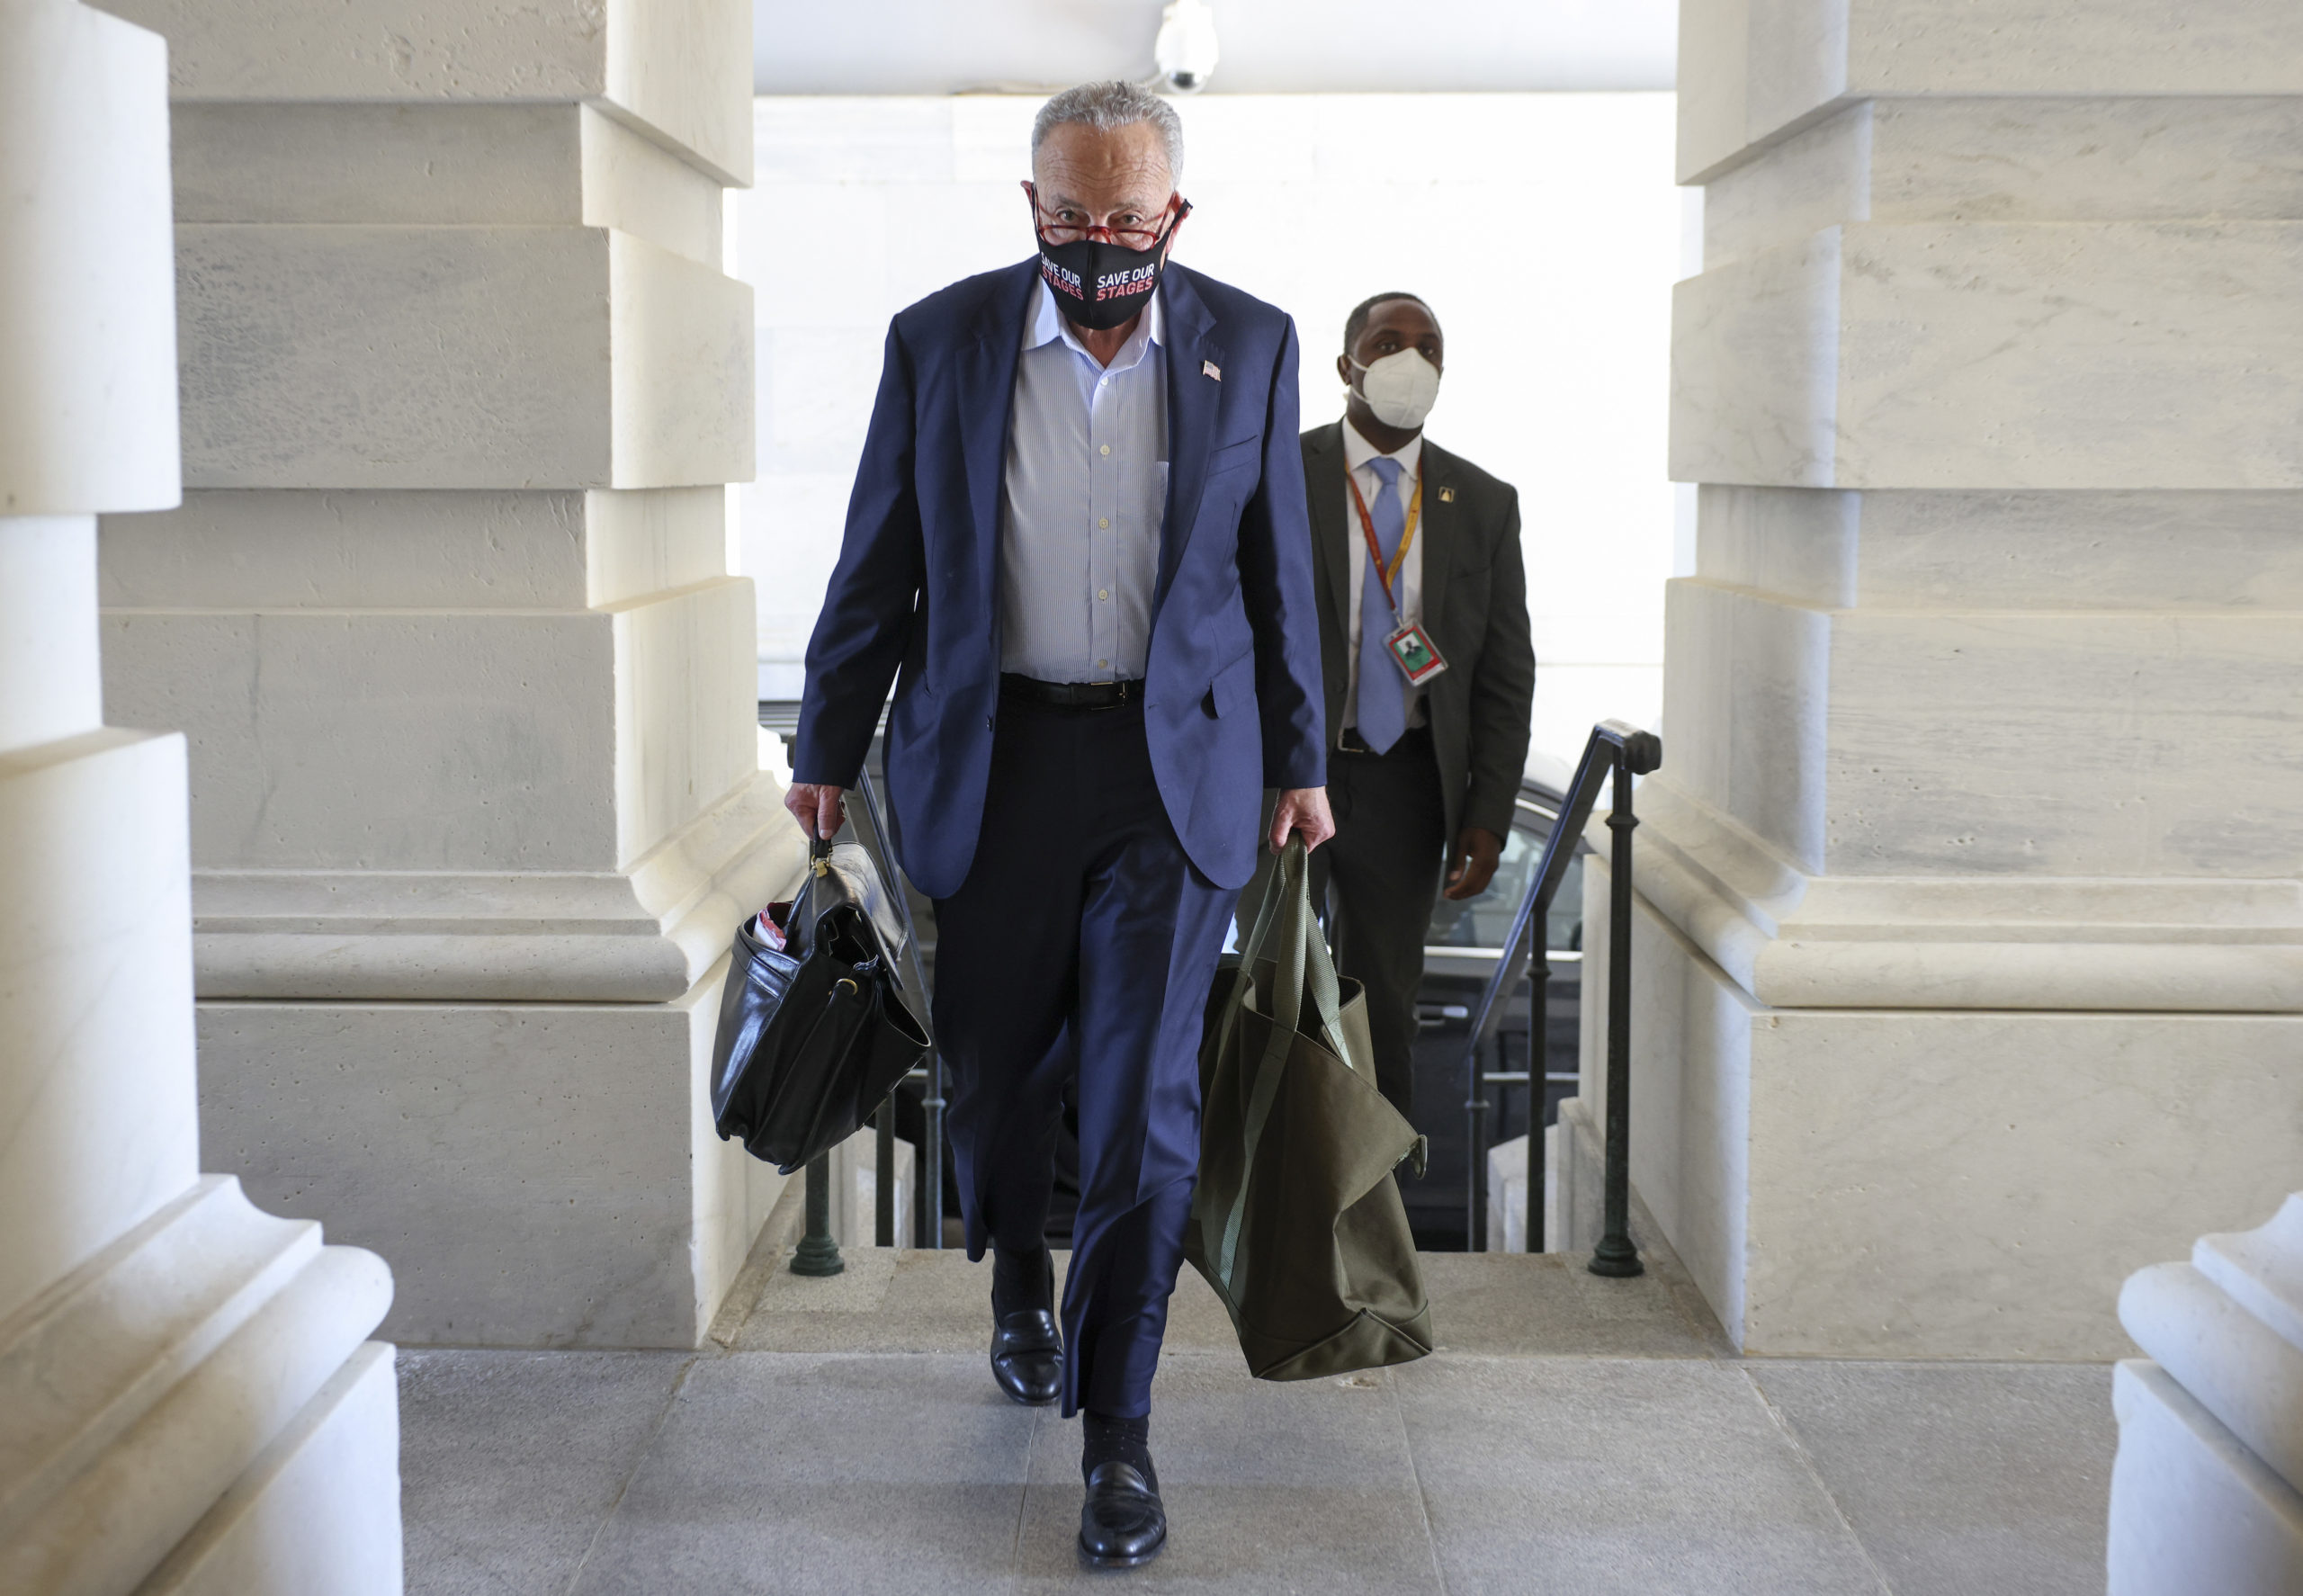 Senate Majority Leader Chuck Schumer arrives at the Capitol on Monday. He and House Speaker Nancy Pelosi are trying to guide a funding bill, budget and infrastructure package through a bitterly divided Congress before Friday, when a shutdown is set to go into effect. (Kevin Dietsch/Getty Images)